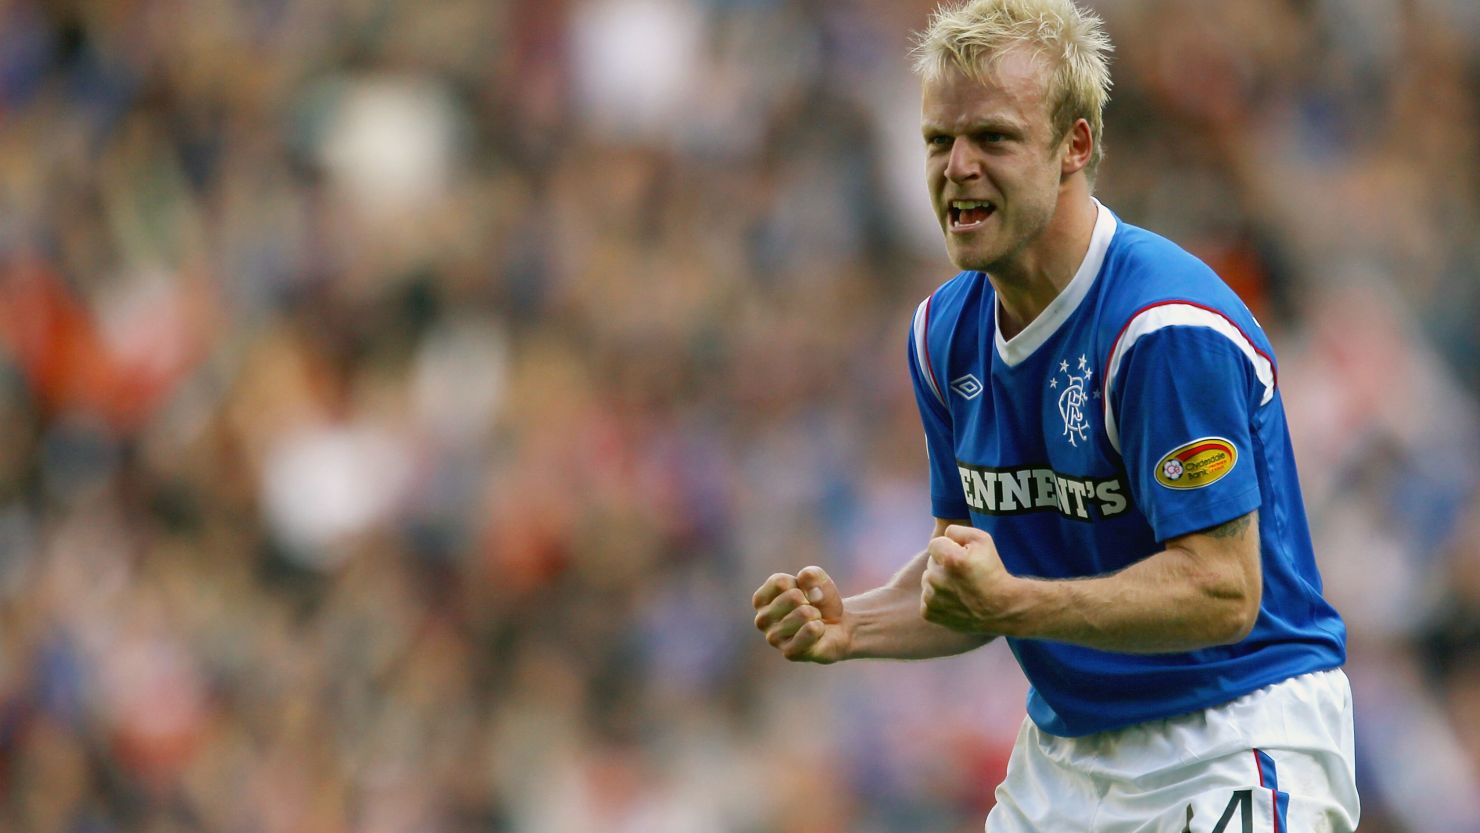 Two-goal Steven Naismith celebrates as Rangers beat Celtic 4-2 in the Old Firm Derby  